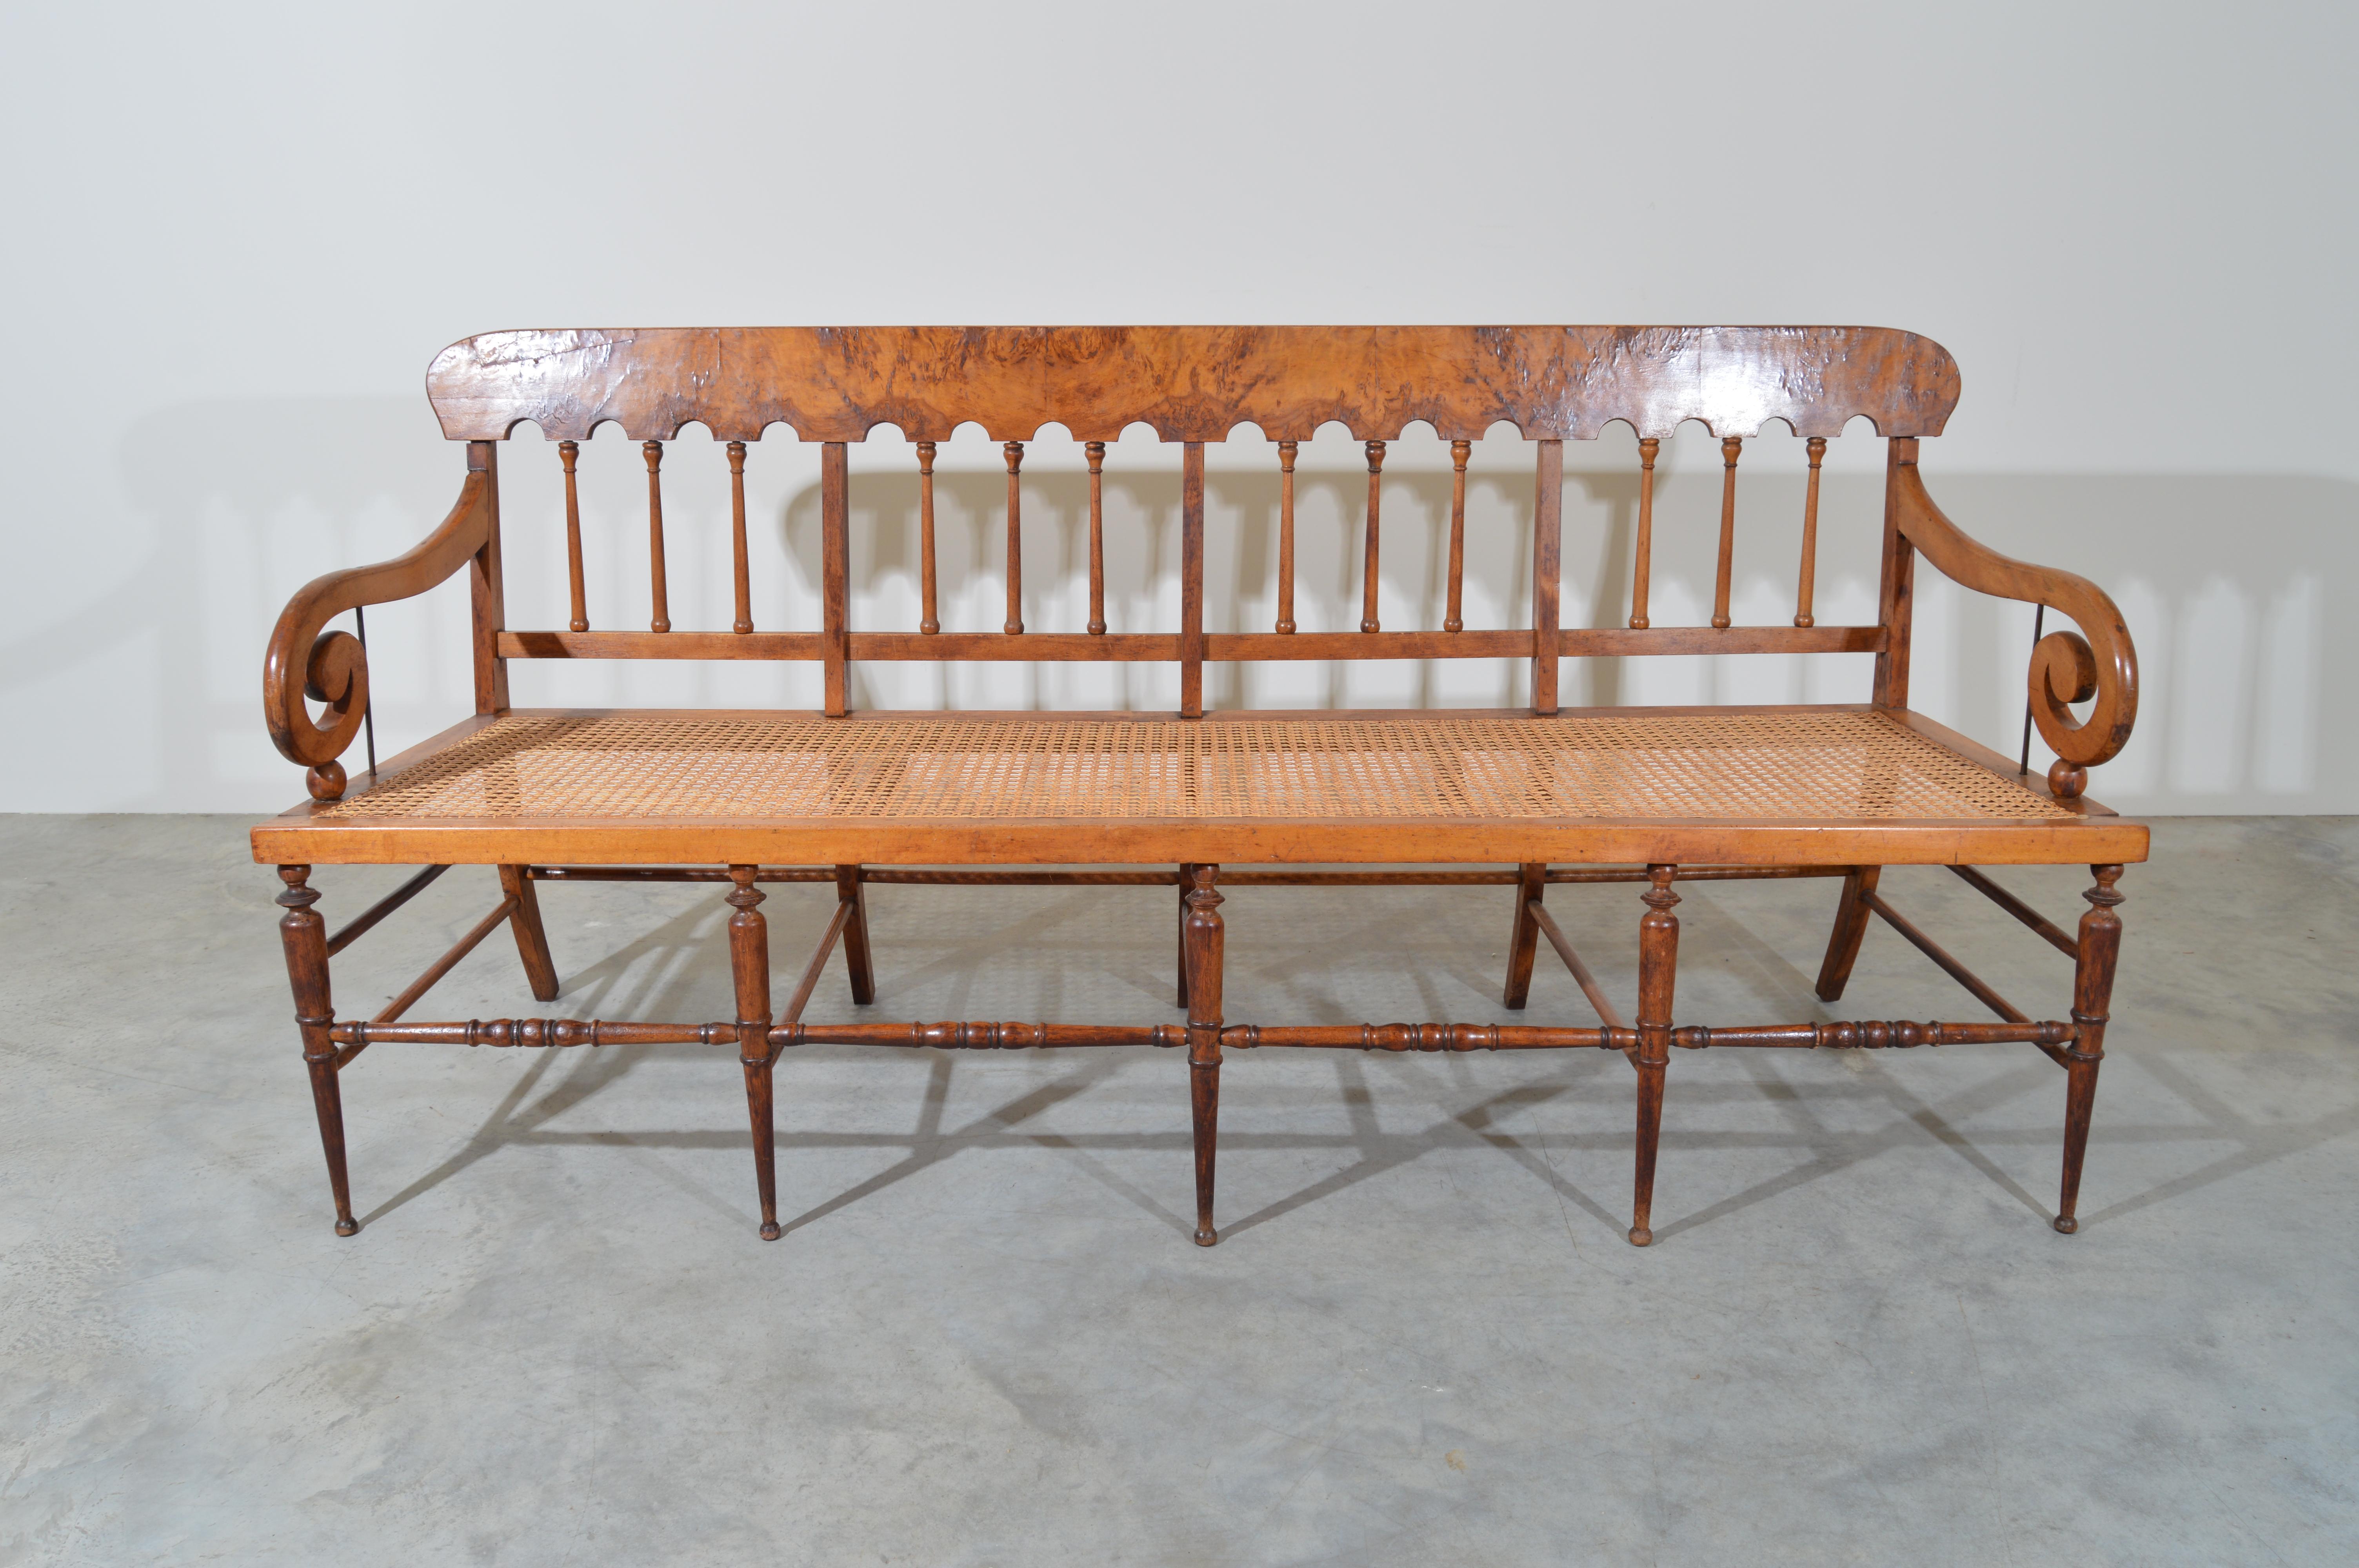 A rare figured burlwood maple doweled leg early 19th century bench c. 1820-1840. Fully restored of solid construction & new French caning. A museum quality showpiece.